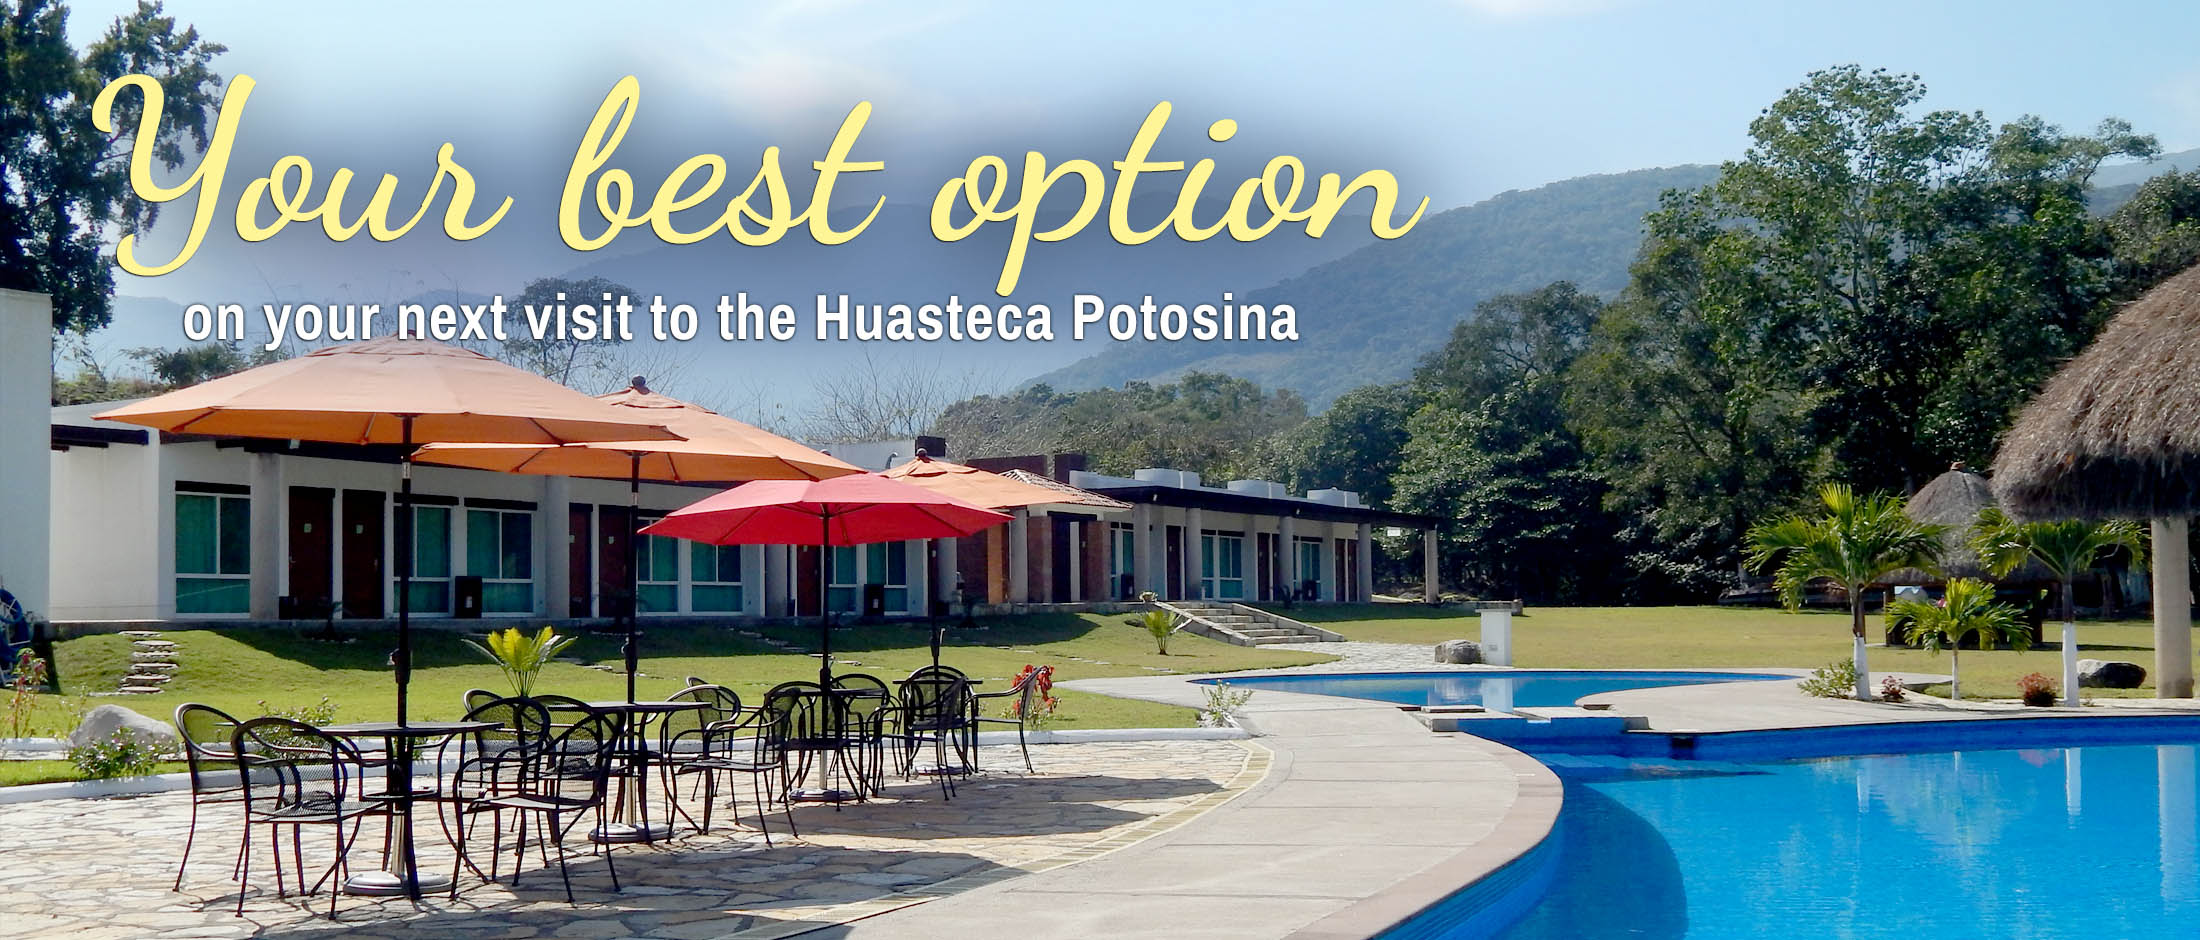 Hotel Real Tamasopo - Your best option on your next visit to the Huasteca Potosina